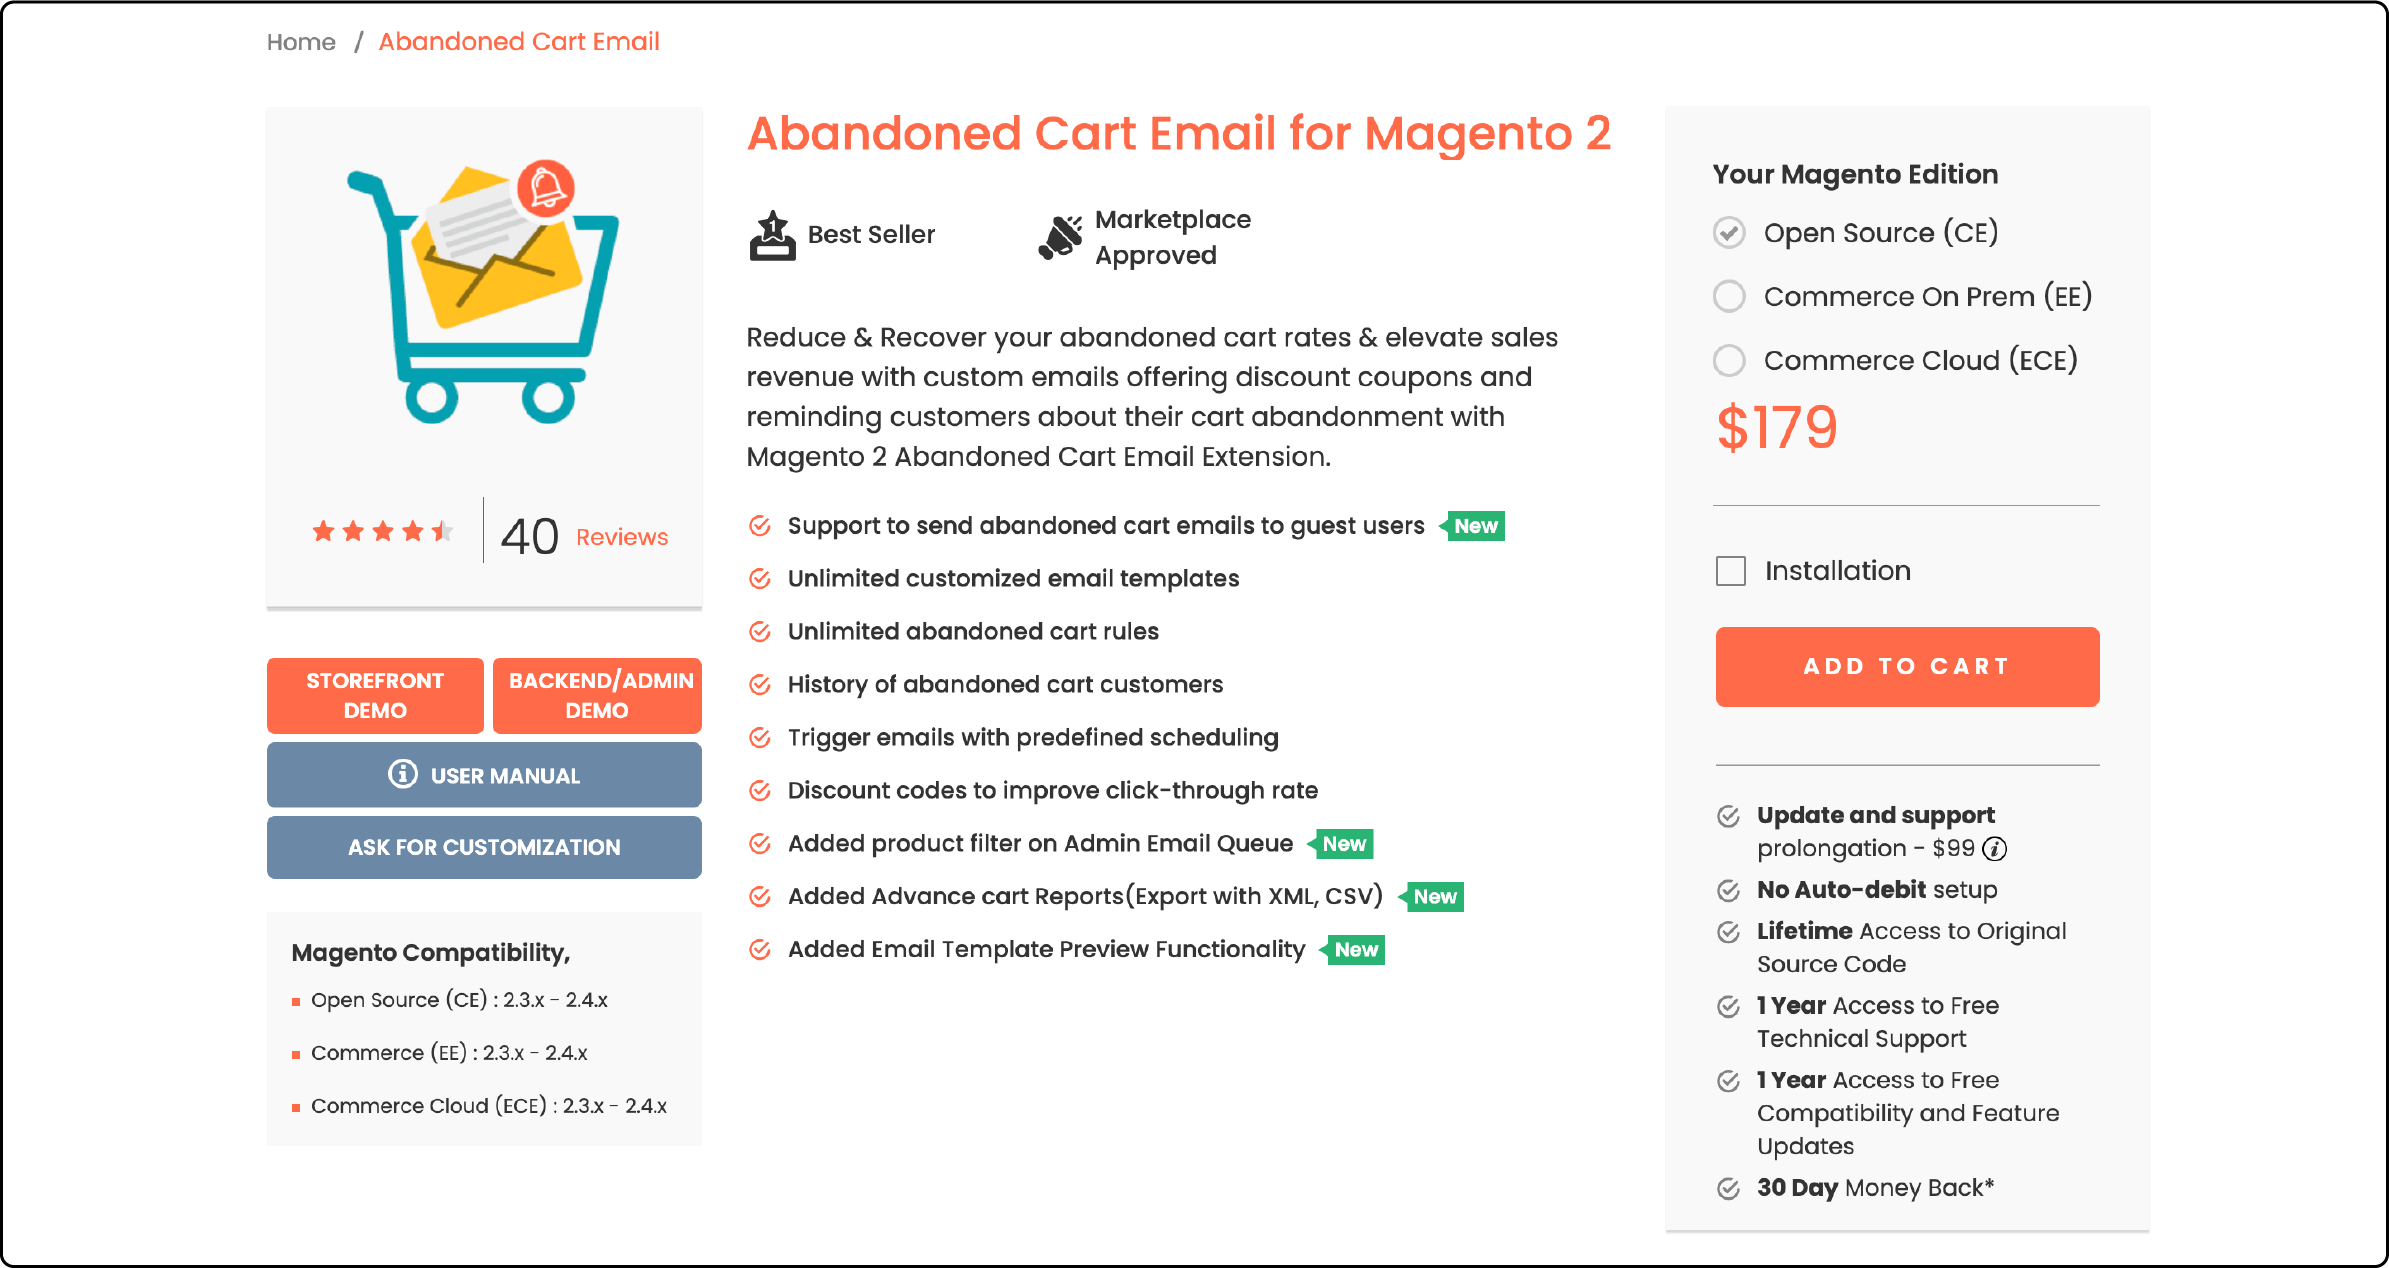 Interface of Magento 2 Abandoned Cart Email by MageDelight